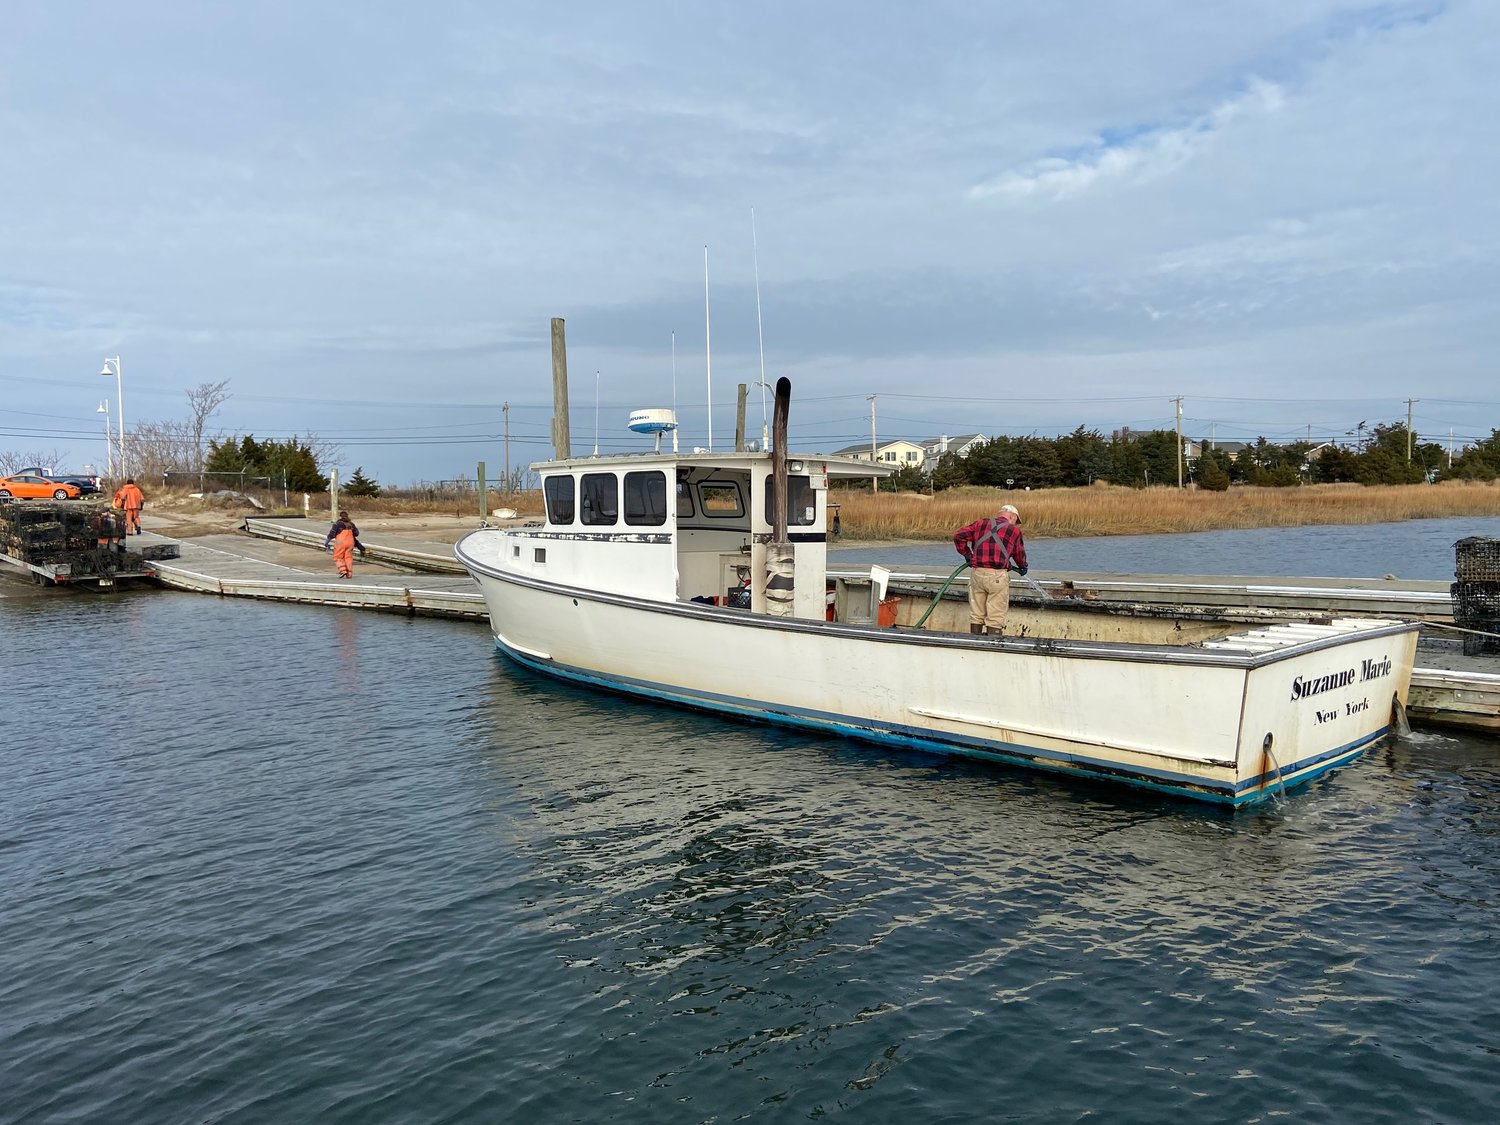 A $115,841 grant will fund the removal of neglected lobster gear from an 18 square mile section of the Long Island Sound between New York and Connecticut. About two thirds of the traps to be removed – probably more than 600 – are off the shore of Oyster Bay.